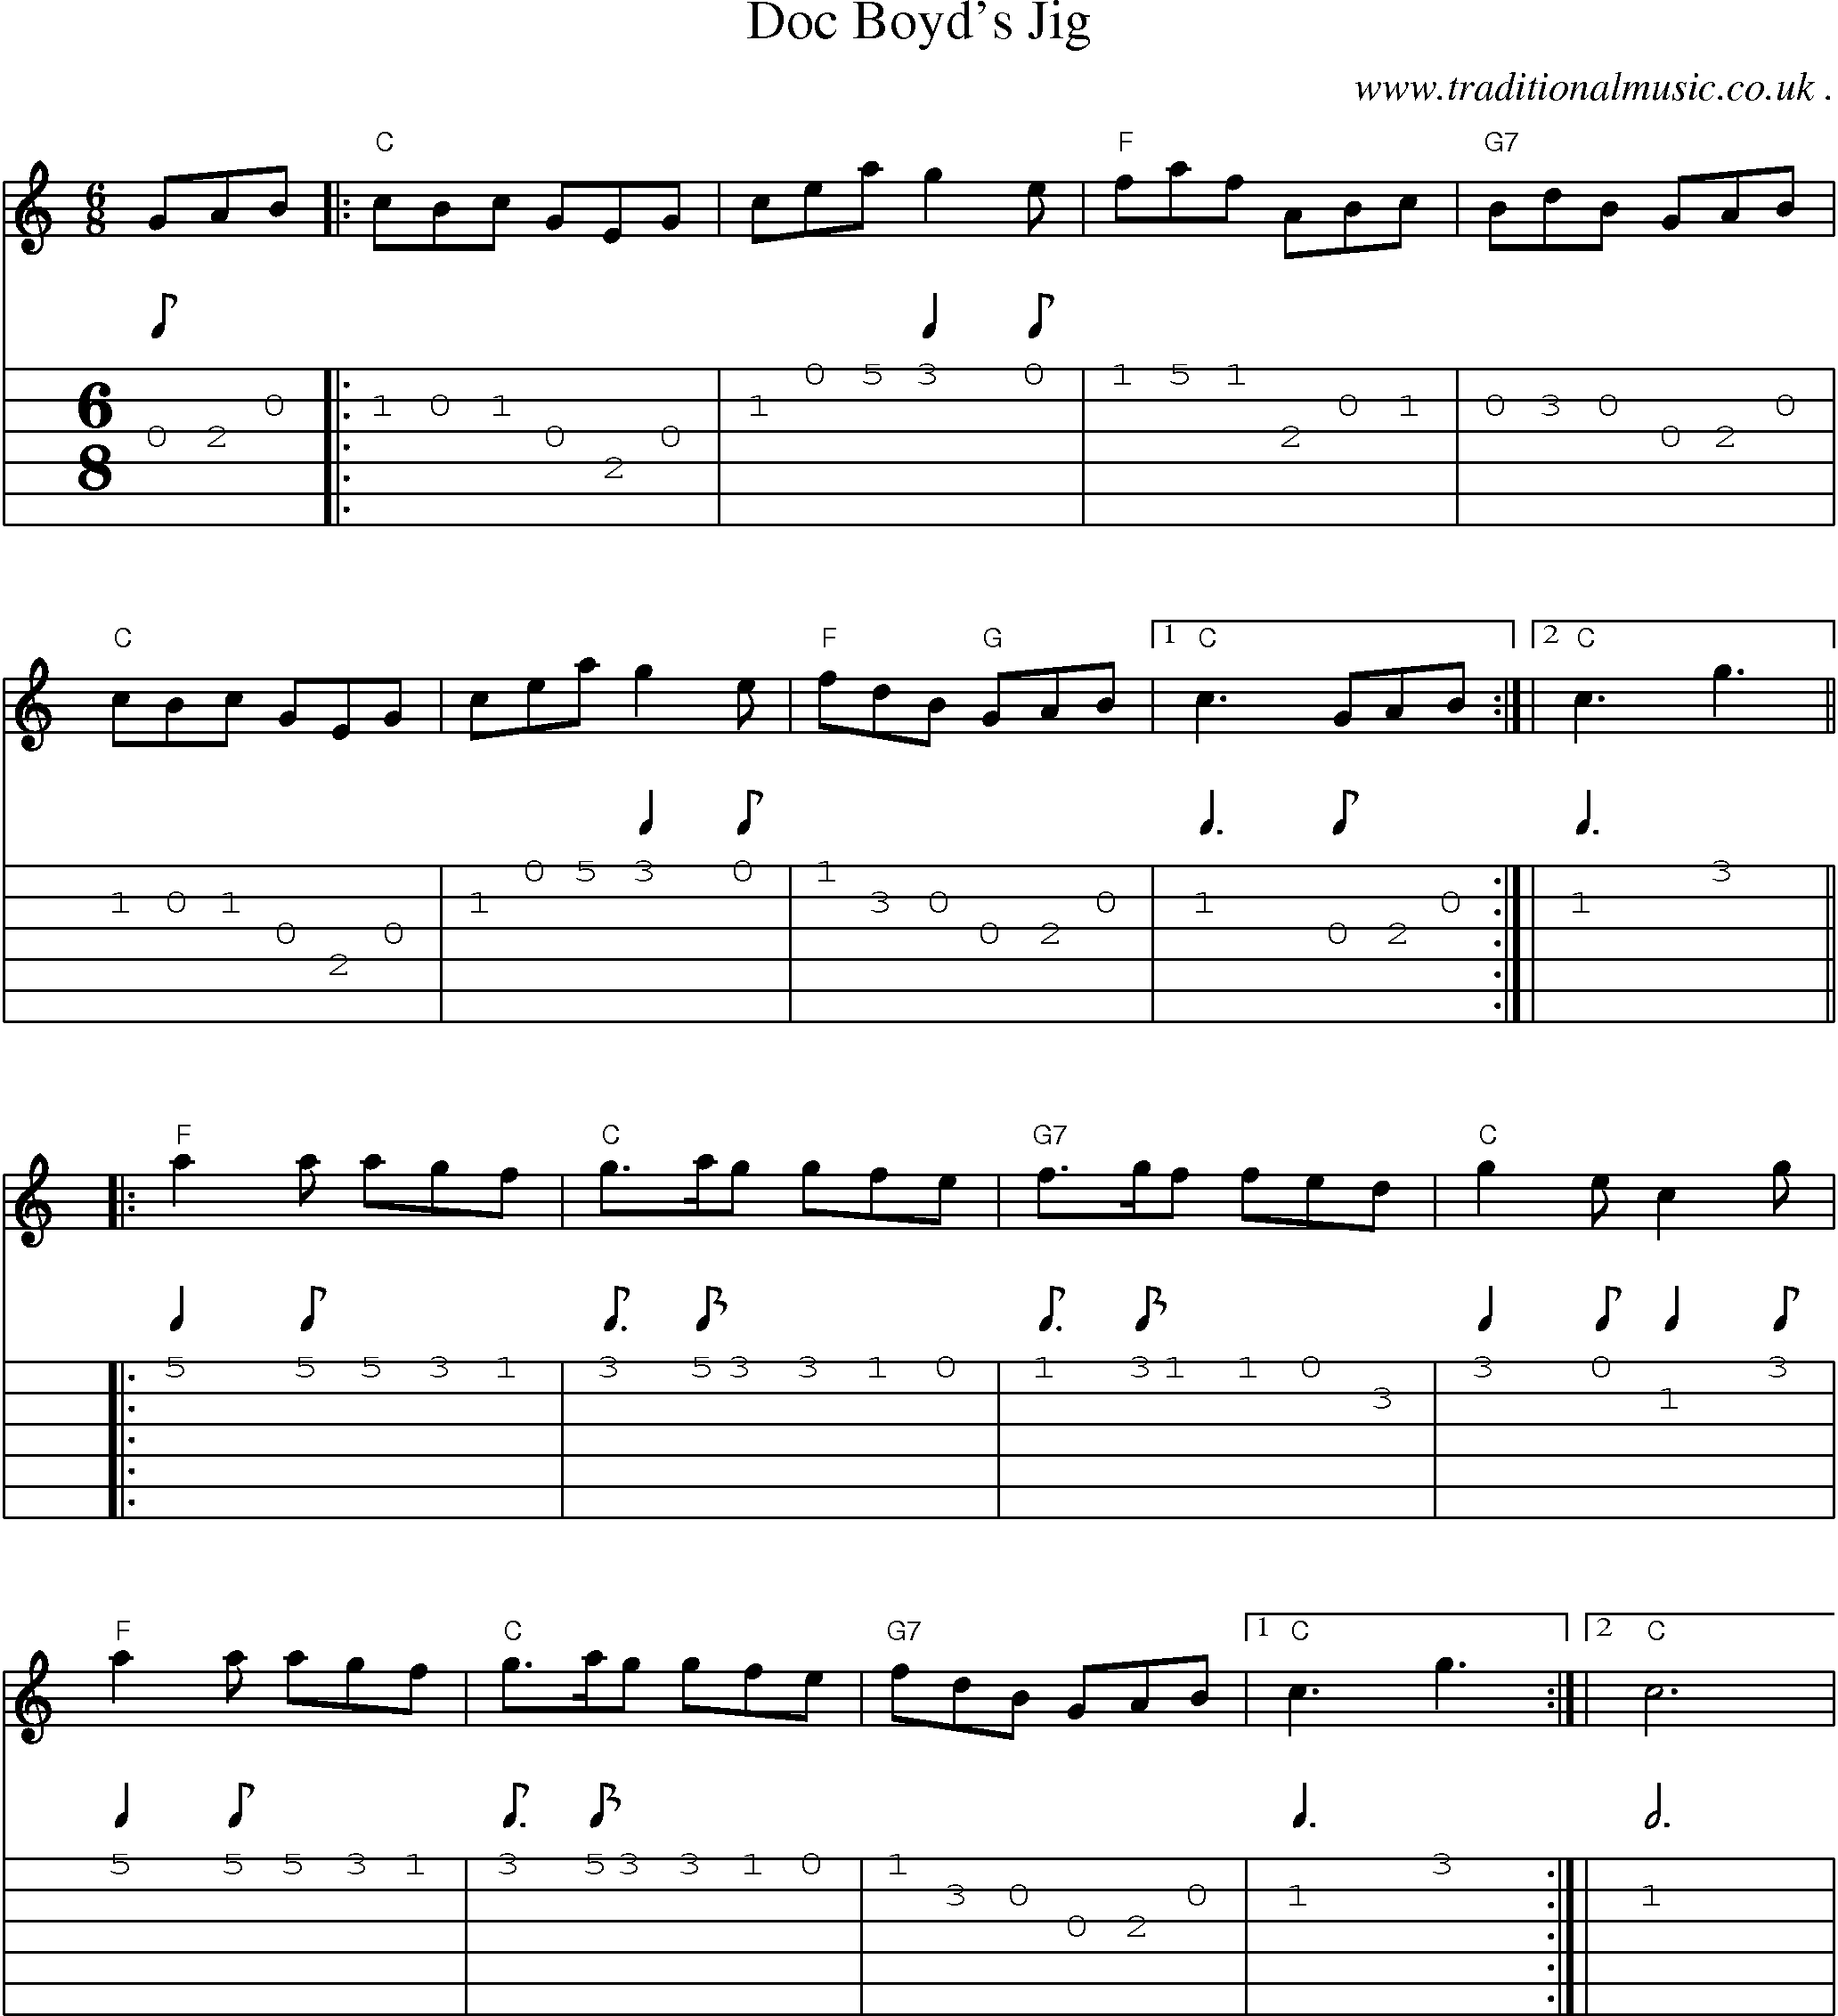 Sheet-music  score, Chords and Guitar Tabs for Doc Boyds Jig